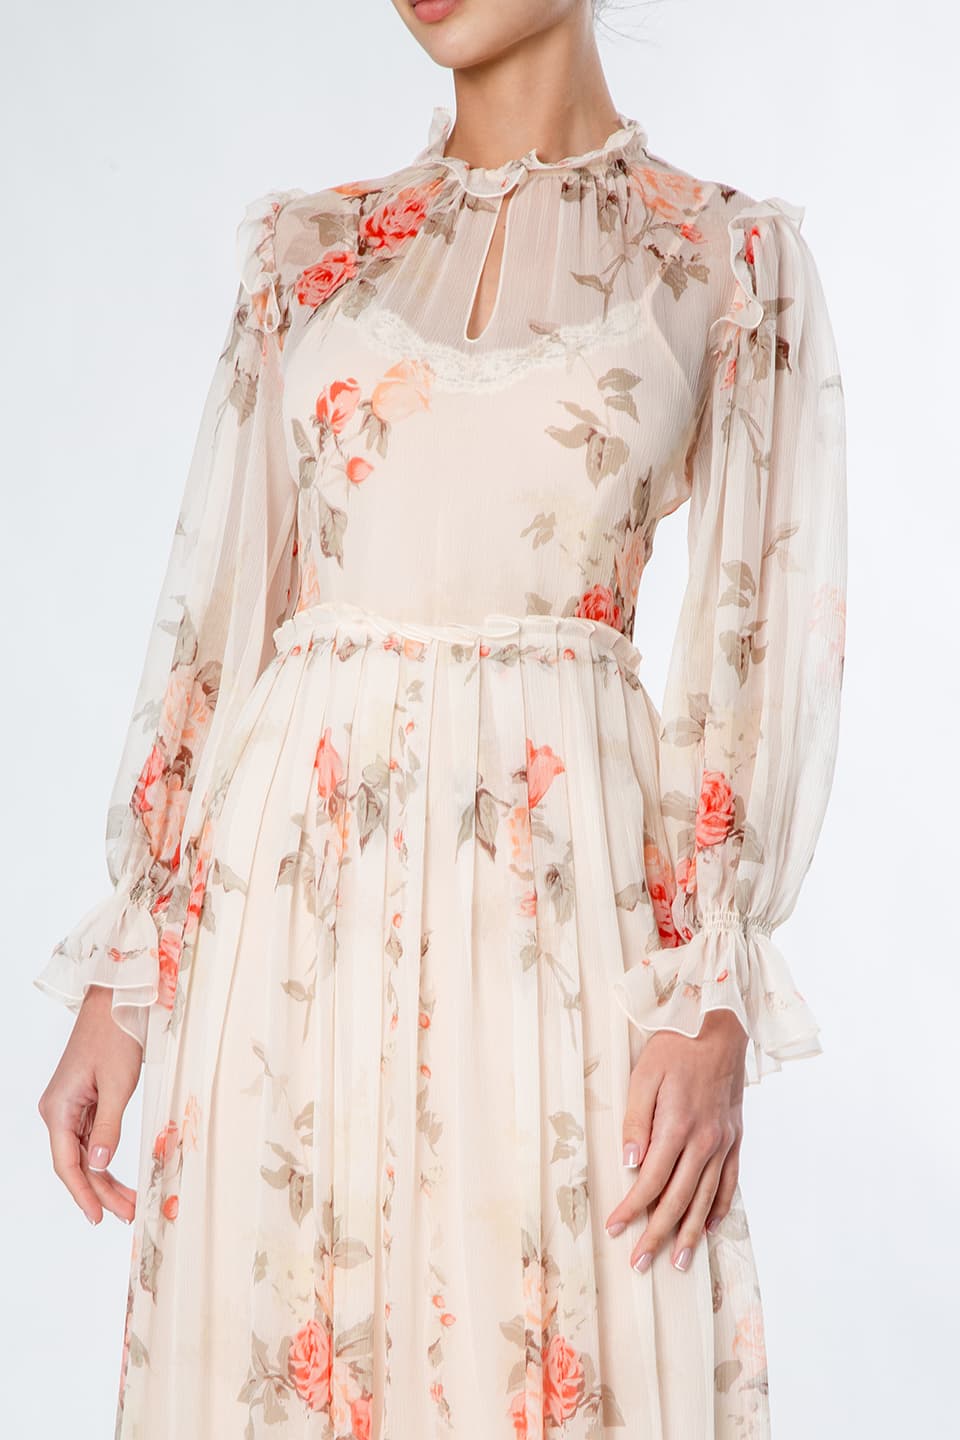 Fashion designer Vilshenko's midi dress in peach pink color with detailed floral print